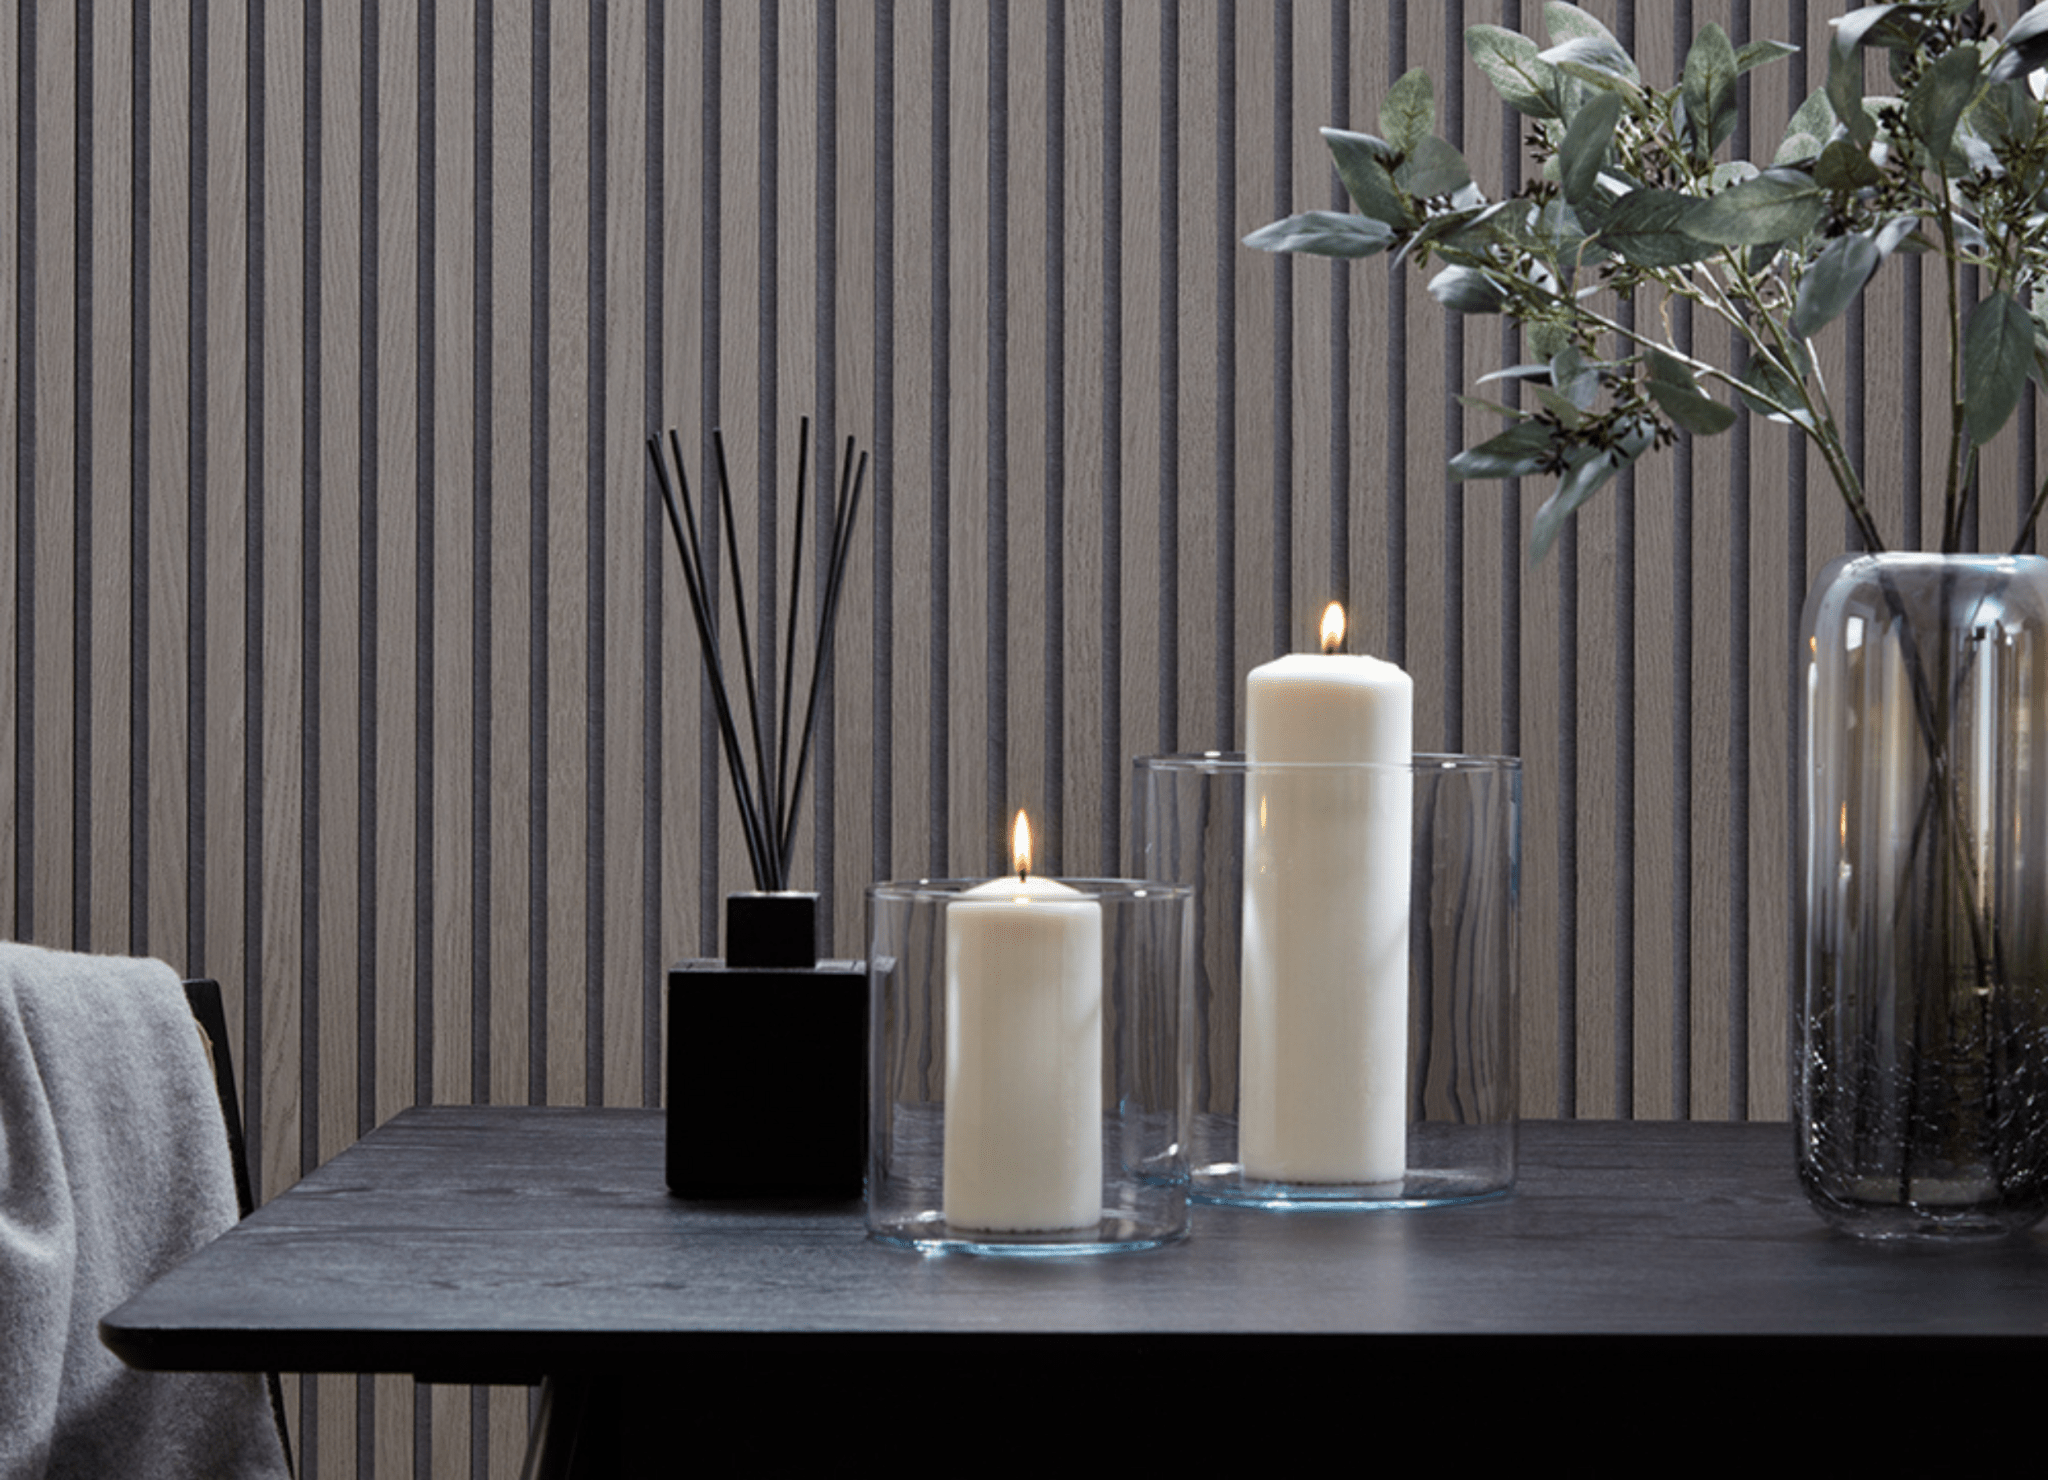 Greige interior design featuring SlatWall Grey Oak panels and a black table with two lit candles, a reed diffuser and vase